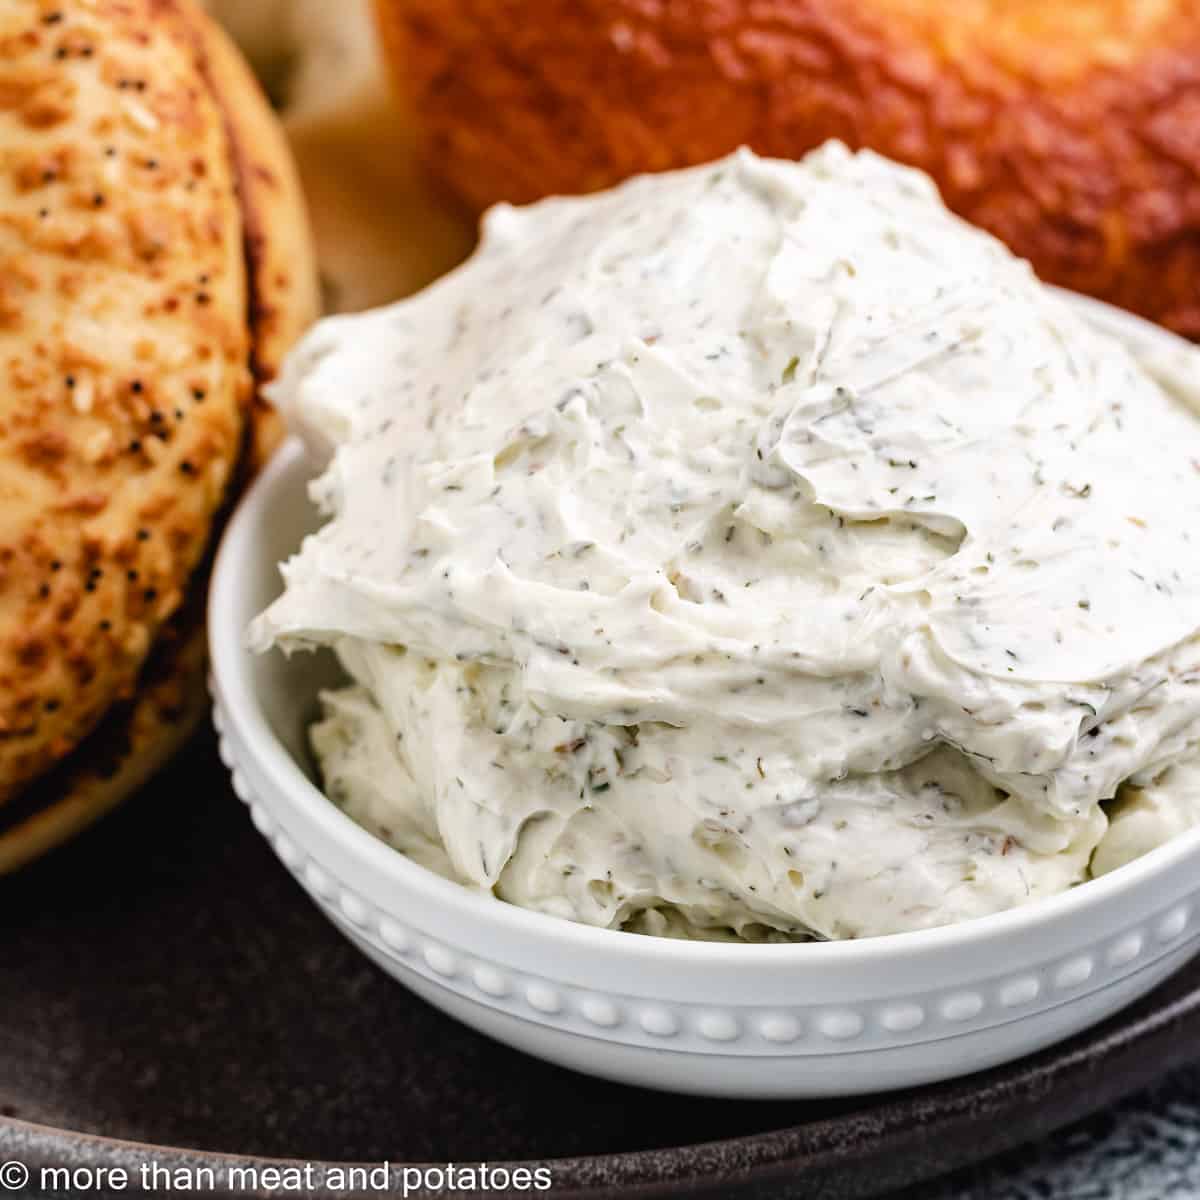 Simple Herb And Garlic Cream Cheese